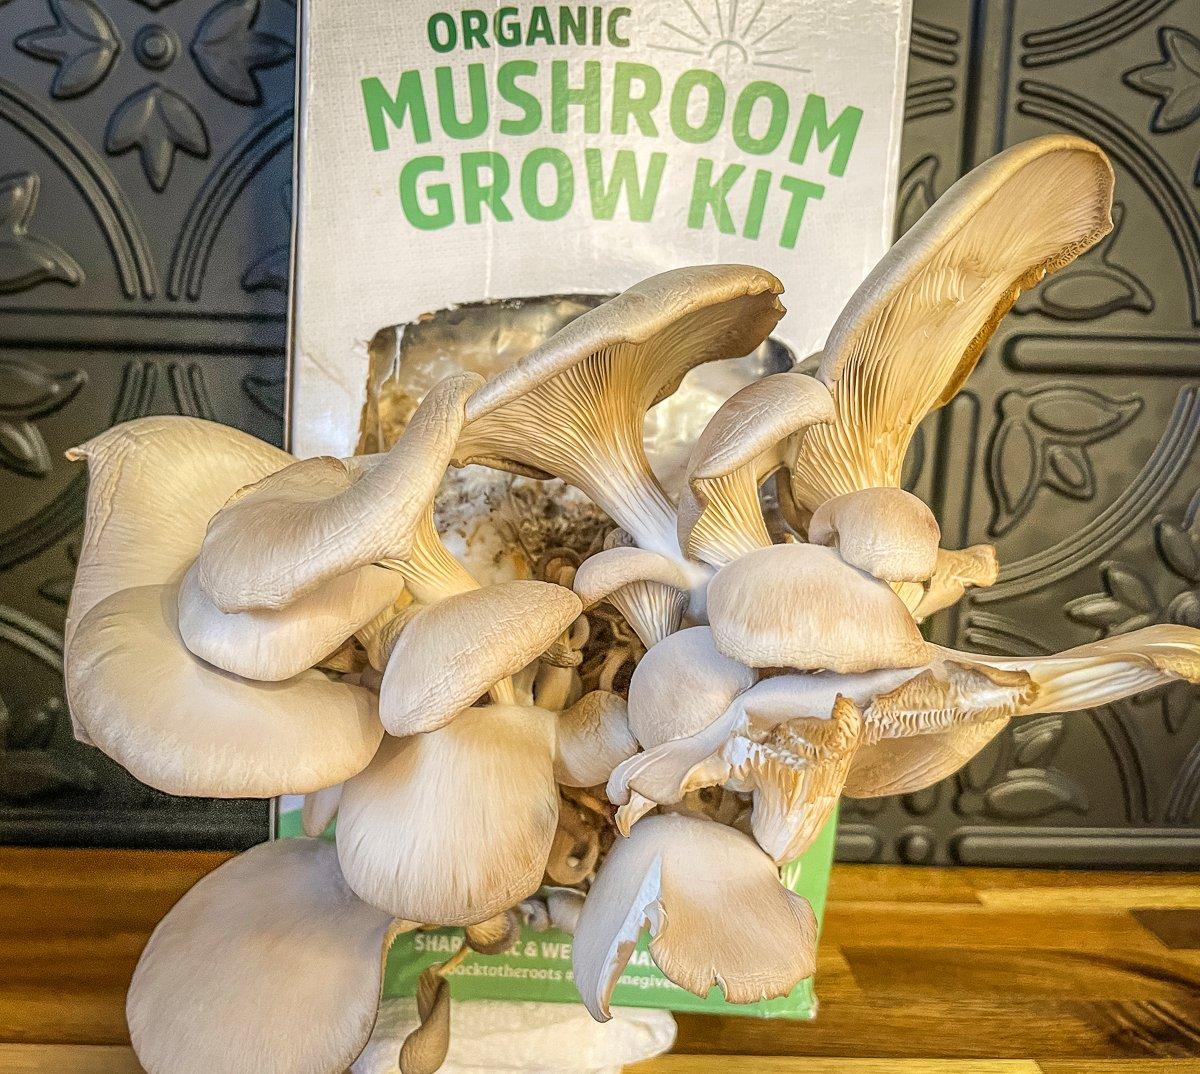 Pick the mushrooms each day.